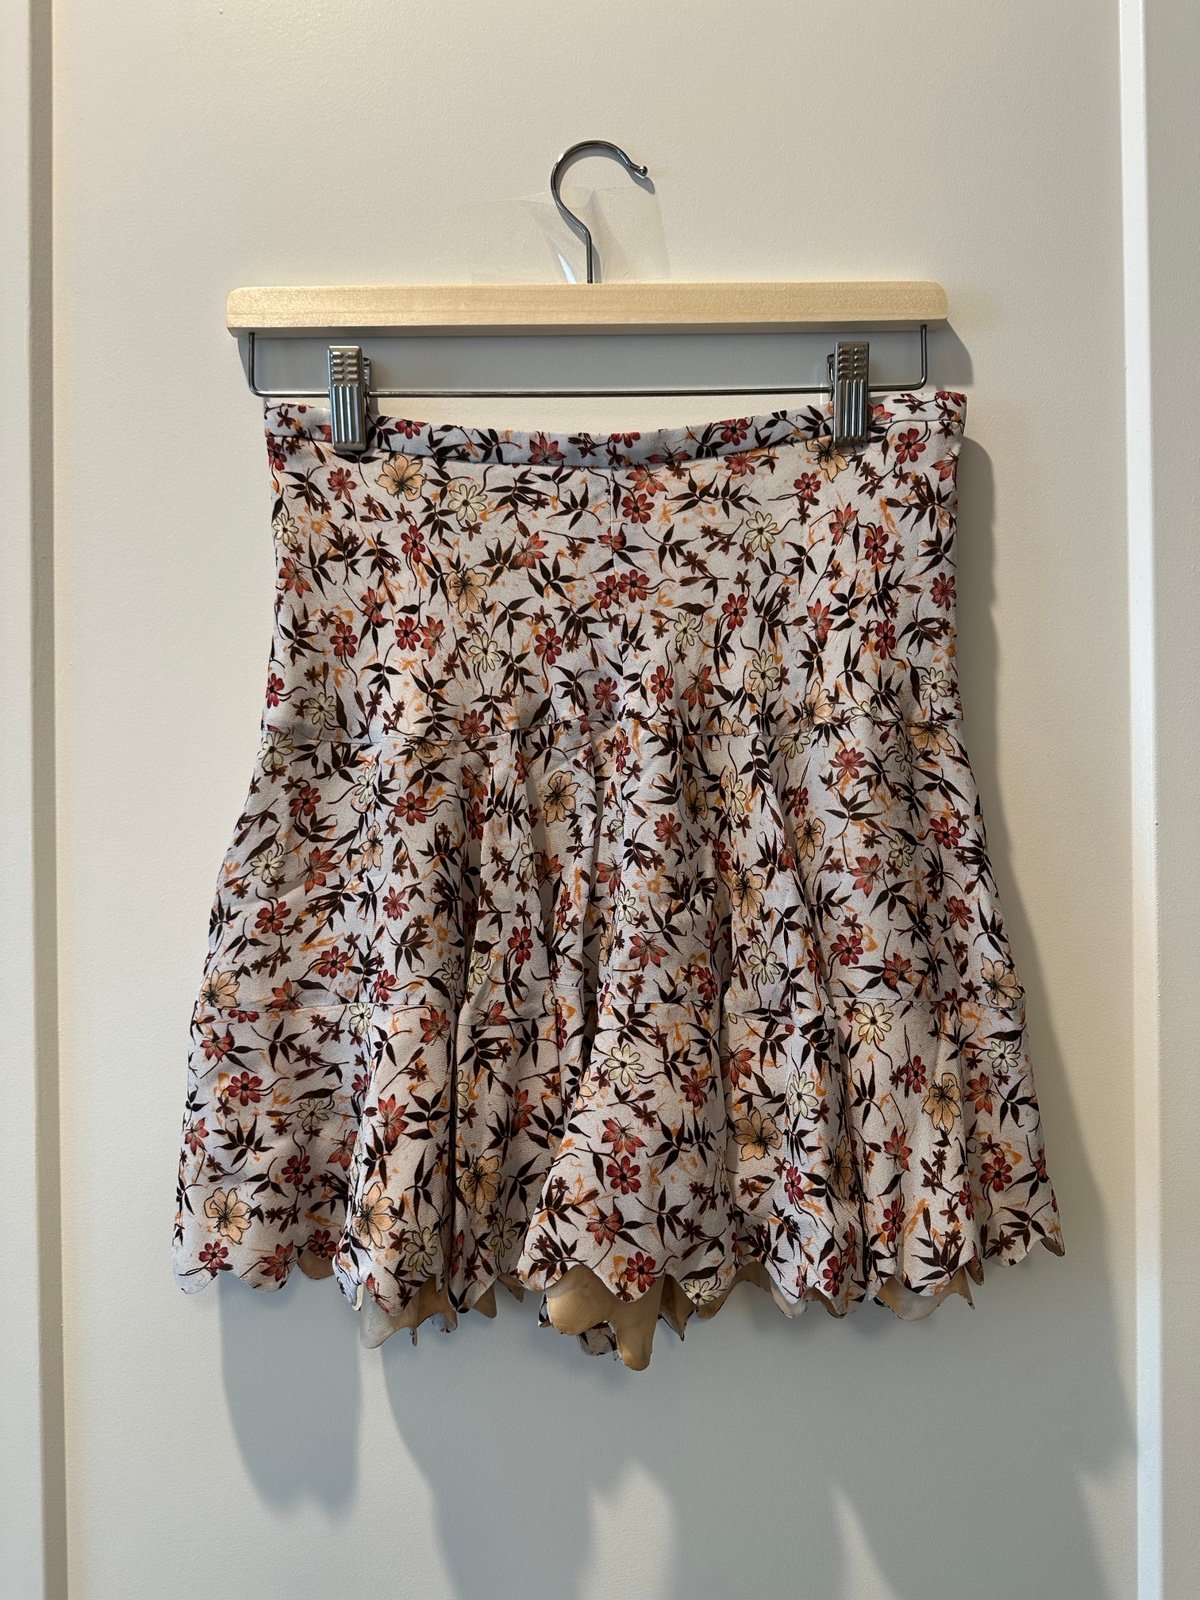 big discount NWT CHLOE Floral-Print Viscose Shorts FR36 IuAyOeEvY Factory Price